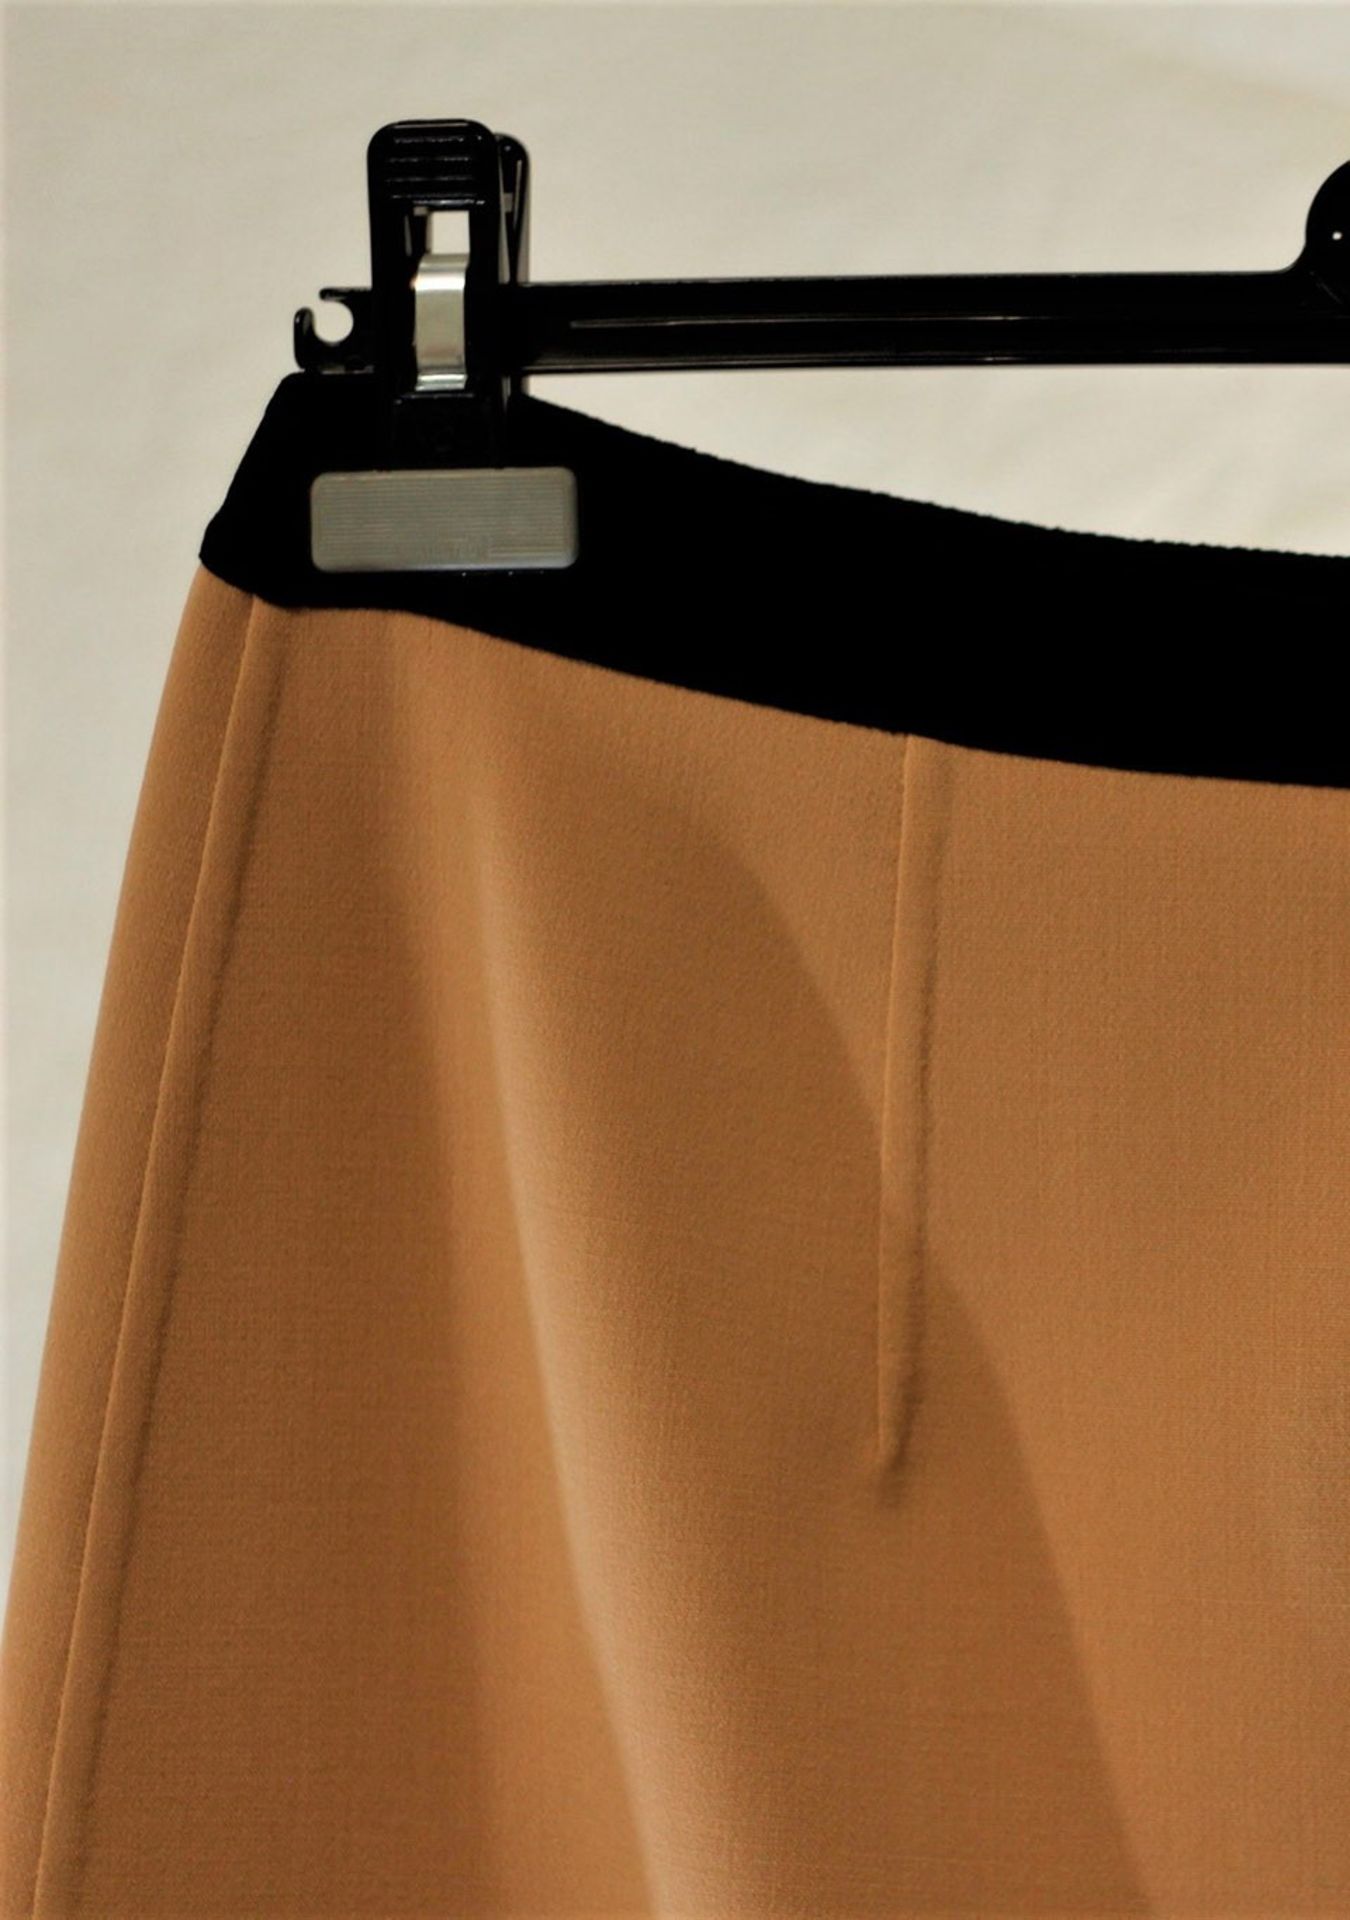 1 x Michael Kors Suntan And Black Skirt - Size: 14 - Material: 96% Virgin Wool, 4% Spandex - From - Image 7 of 7